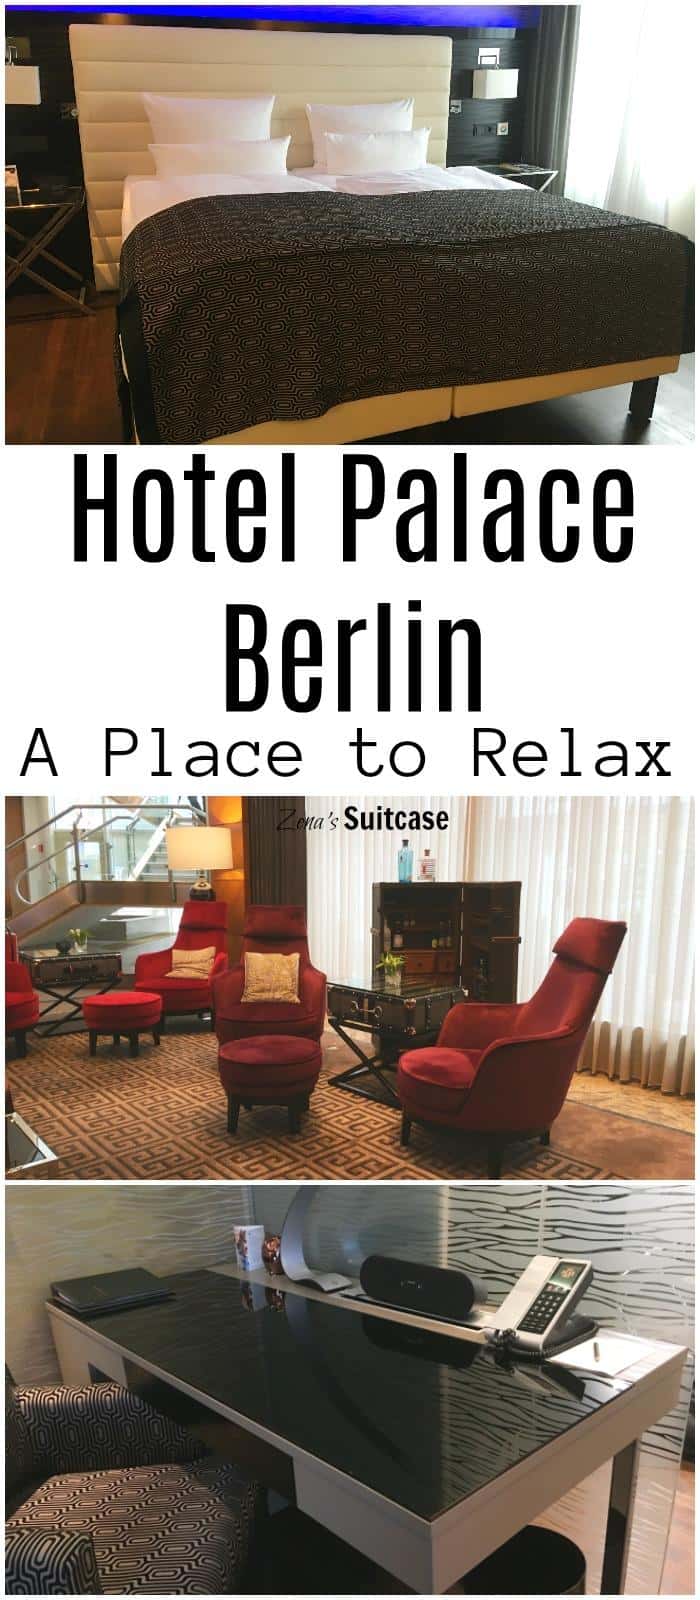 The Hotel Palace Berlin is a great place to stay in Germany’s capital. It’s a luxury hotel with a charming feel about it. It’s the perfect location for visiting Berlin Zoo and starting your city break with great links to the rest of the city.